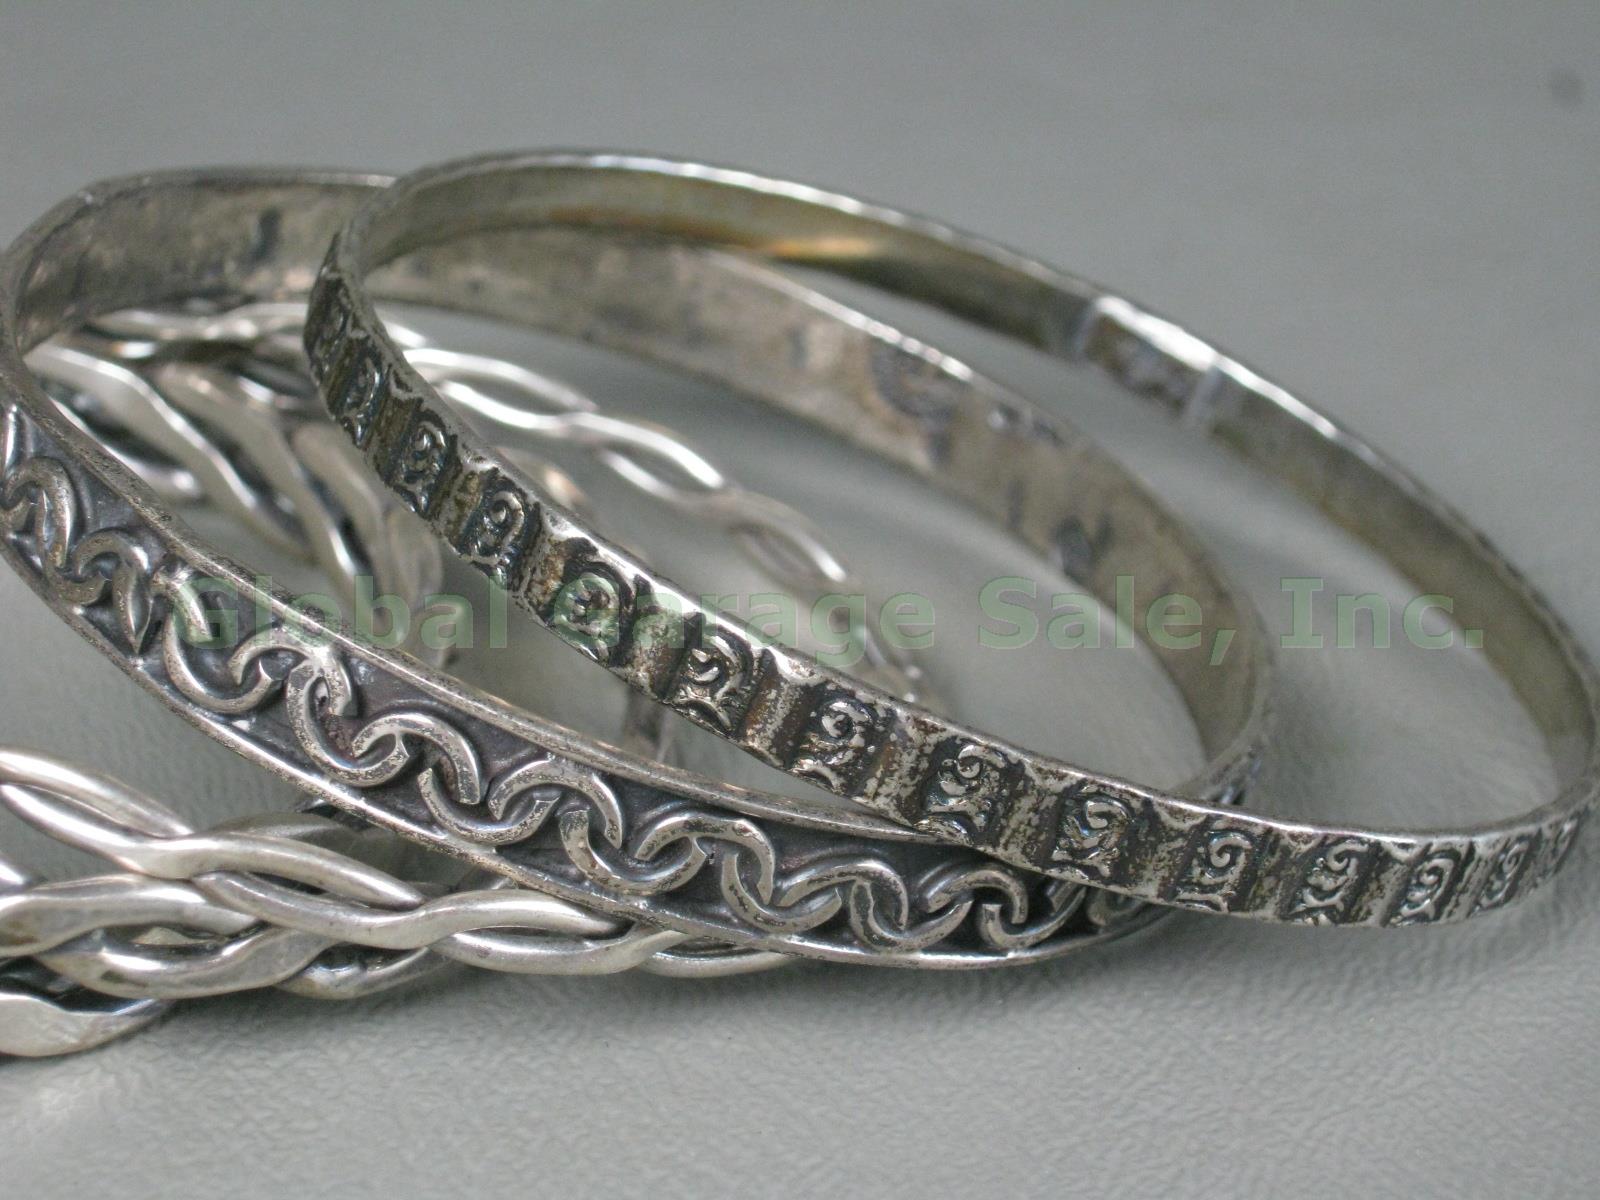 10 Vtg Sterling Silver Bangle Bracelets Lot 4.6 Ounces Braided Woven Rope Floral 2